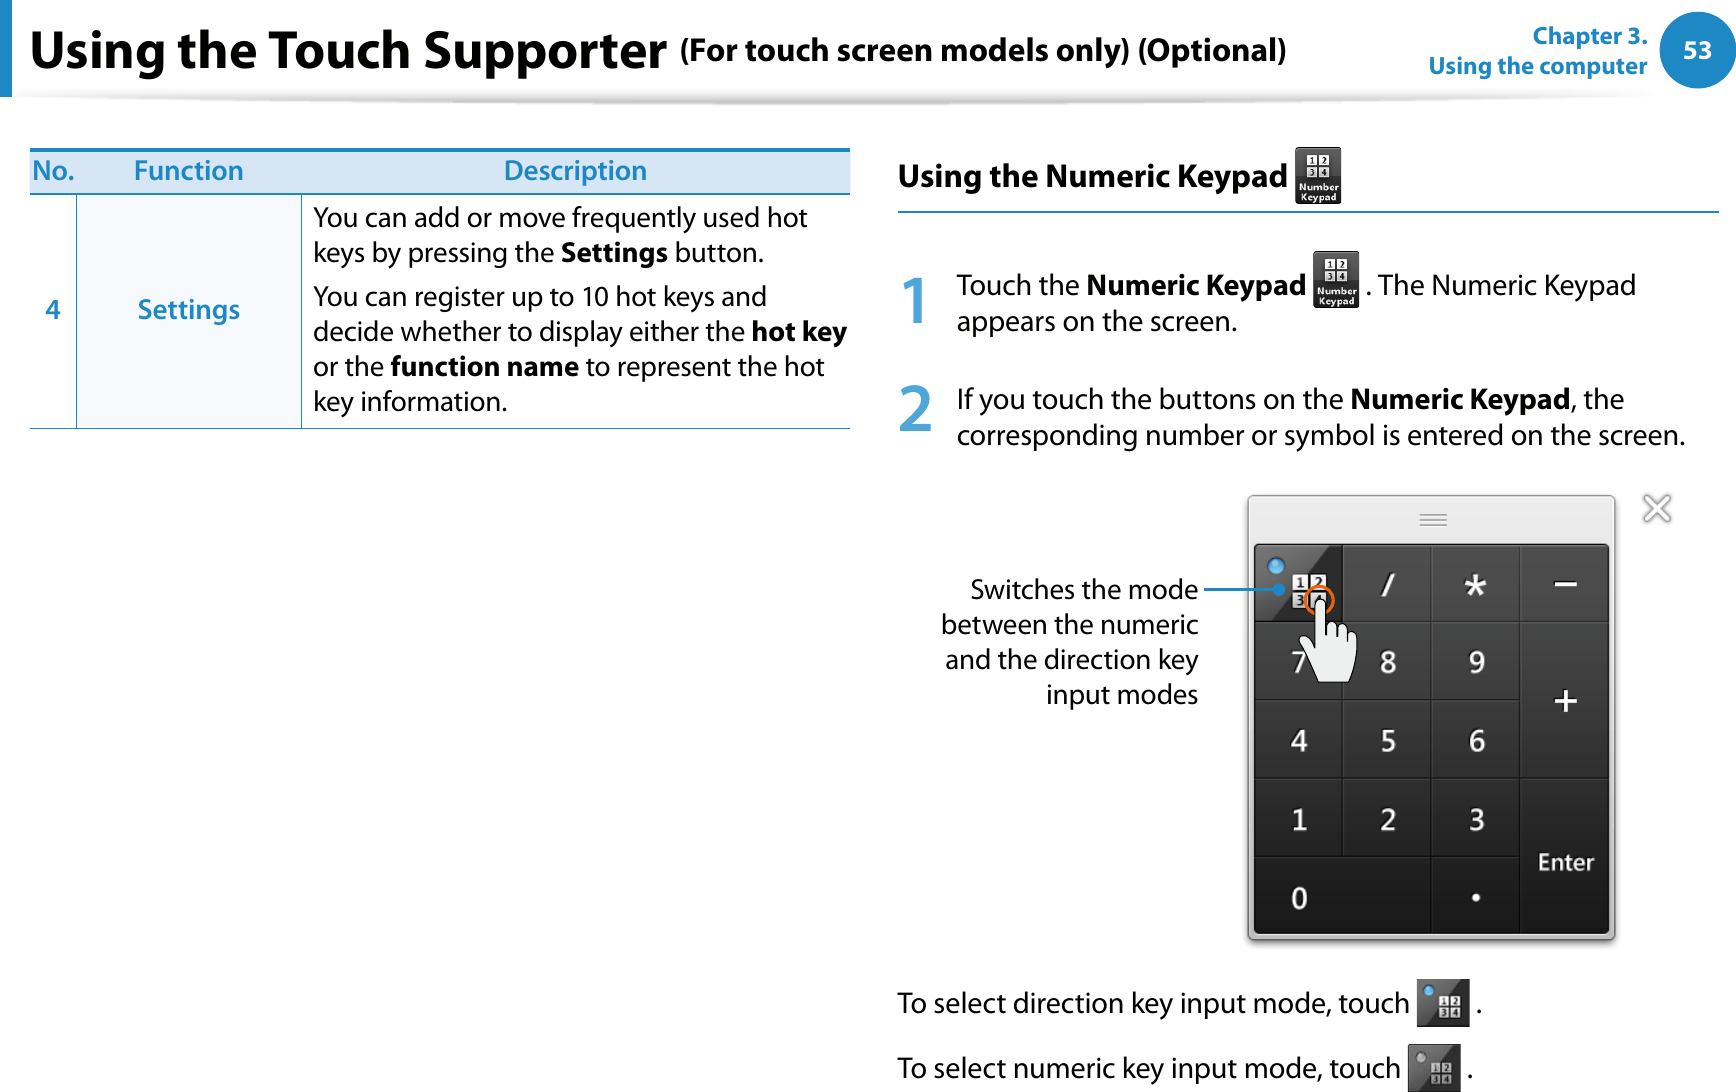 53Chapter 3.  Using the computerUsing the Touch Supporter (For touch screen models only) (Optional)No. Function Description4SettingsYou can add or move frequently used hot keys by pressing the Settings button.You can register up to 10 hot keys and decide whether to display either the hot key or the function name to represent the hot key information.Using the Numeric Keypad 1 Touch the Numeric Keypad  . The Numeric Keypad appears on the screen.2  If you touch the buttons on the Numeric Keypad, the corresponding number or symbol is entered on the screen.Switches the mode between the numeric and the direction key input modesTo select direction key input mode, touch   .To select numeric key input mode, touch   .